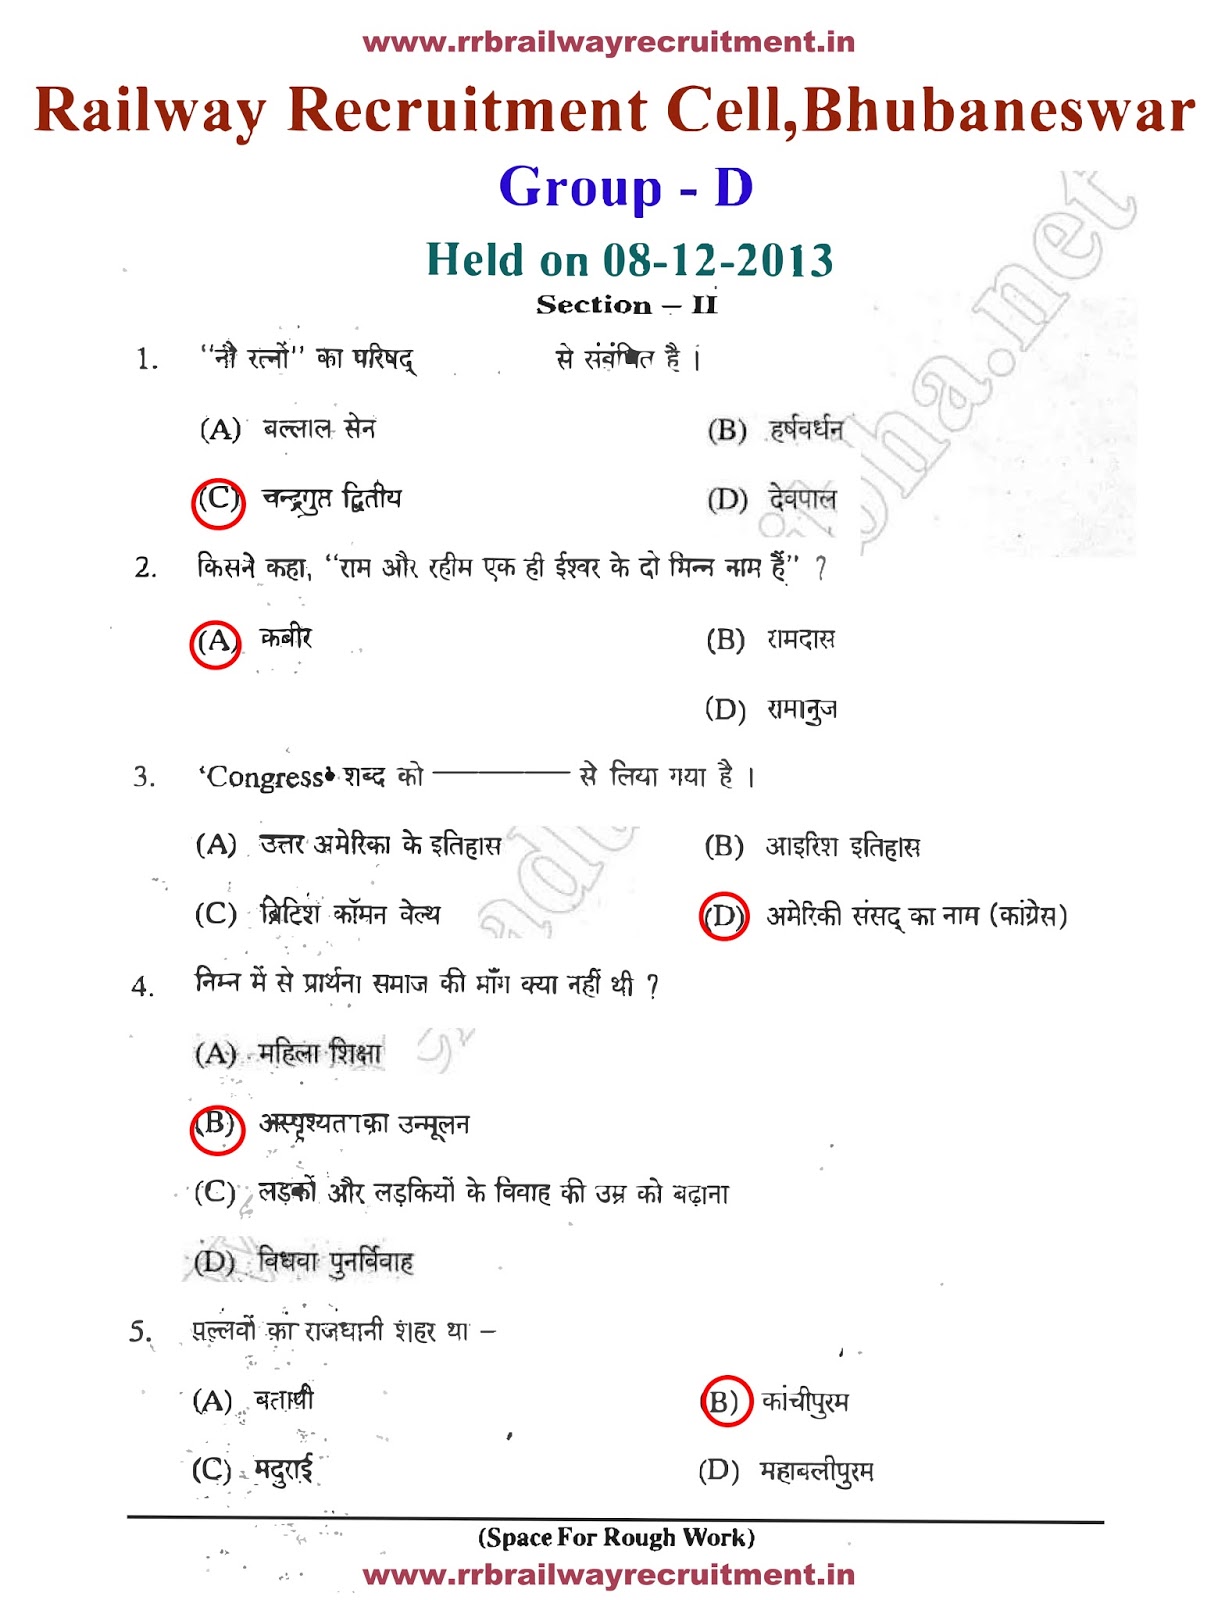 general science for ntpc in hindi